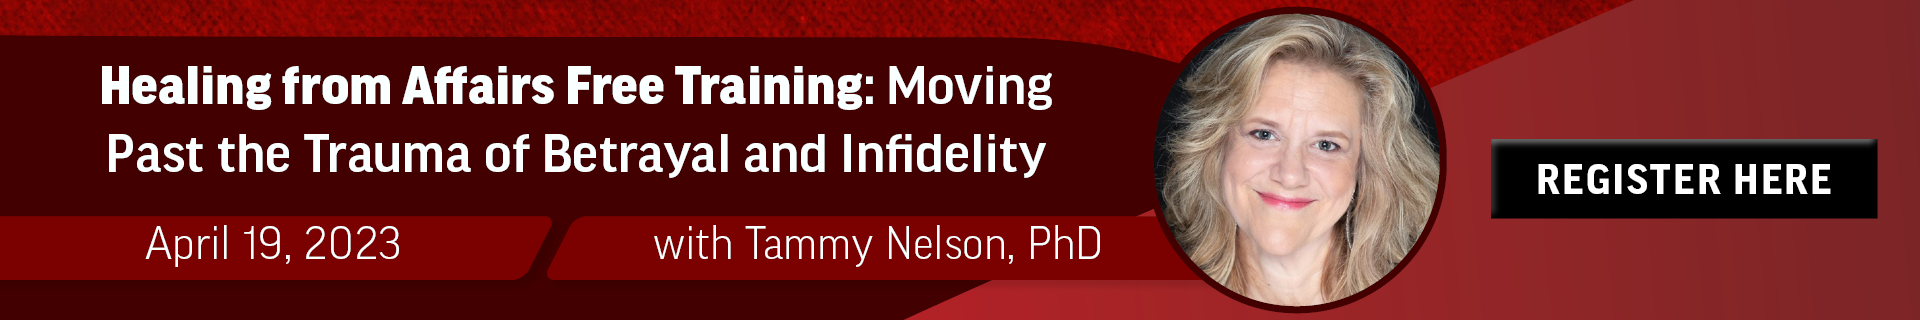 Healing from Affairs with Tammy Nelson: Moving Past the Trauma of Betrayal and Infidelity